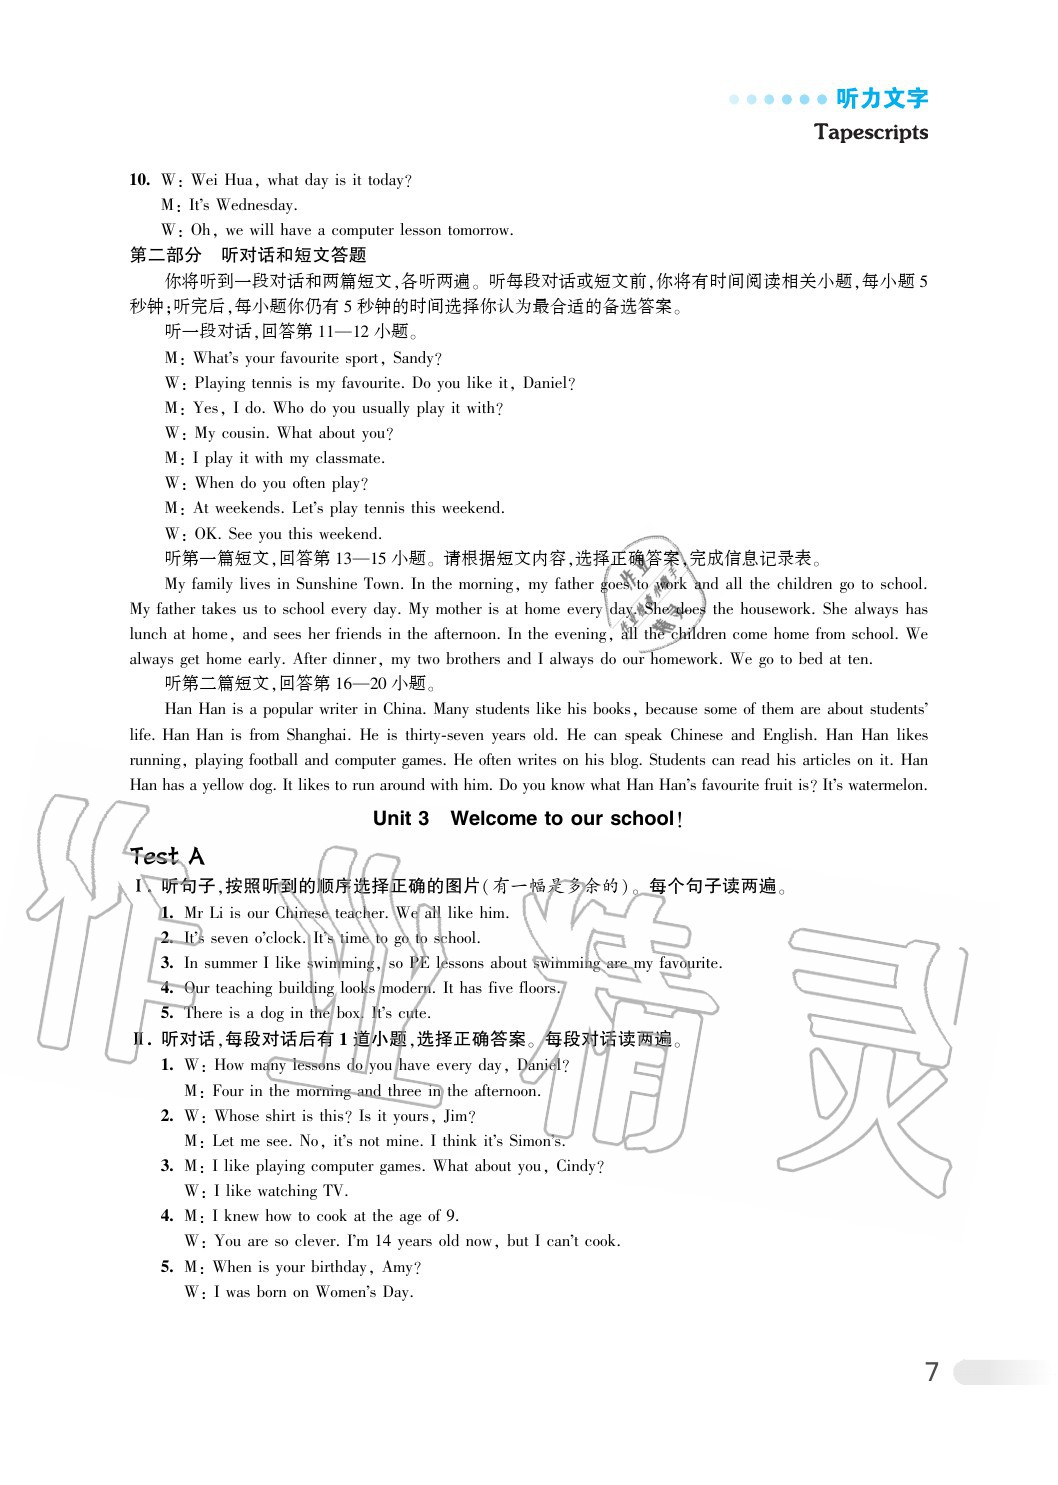 Unit3 Welcome to our school！听力材料 - 第14页